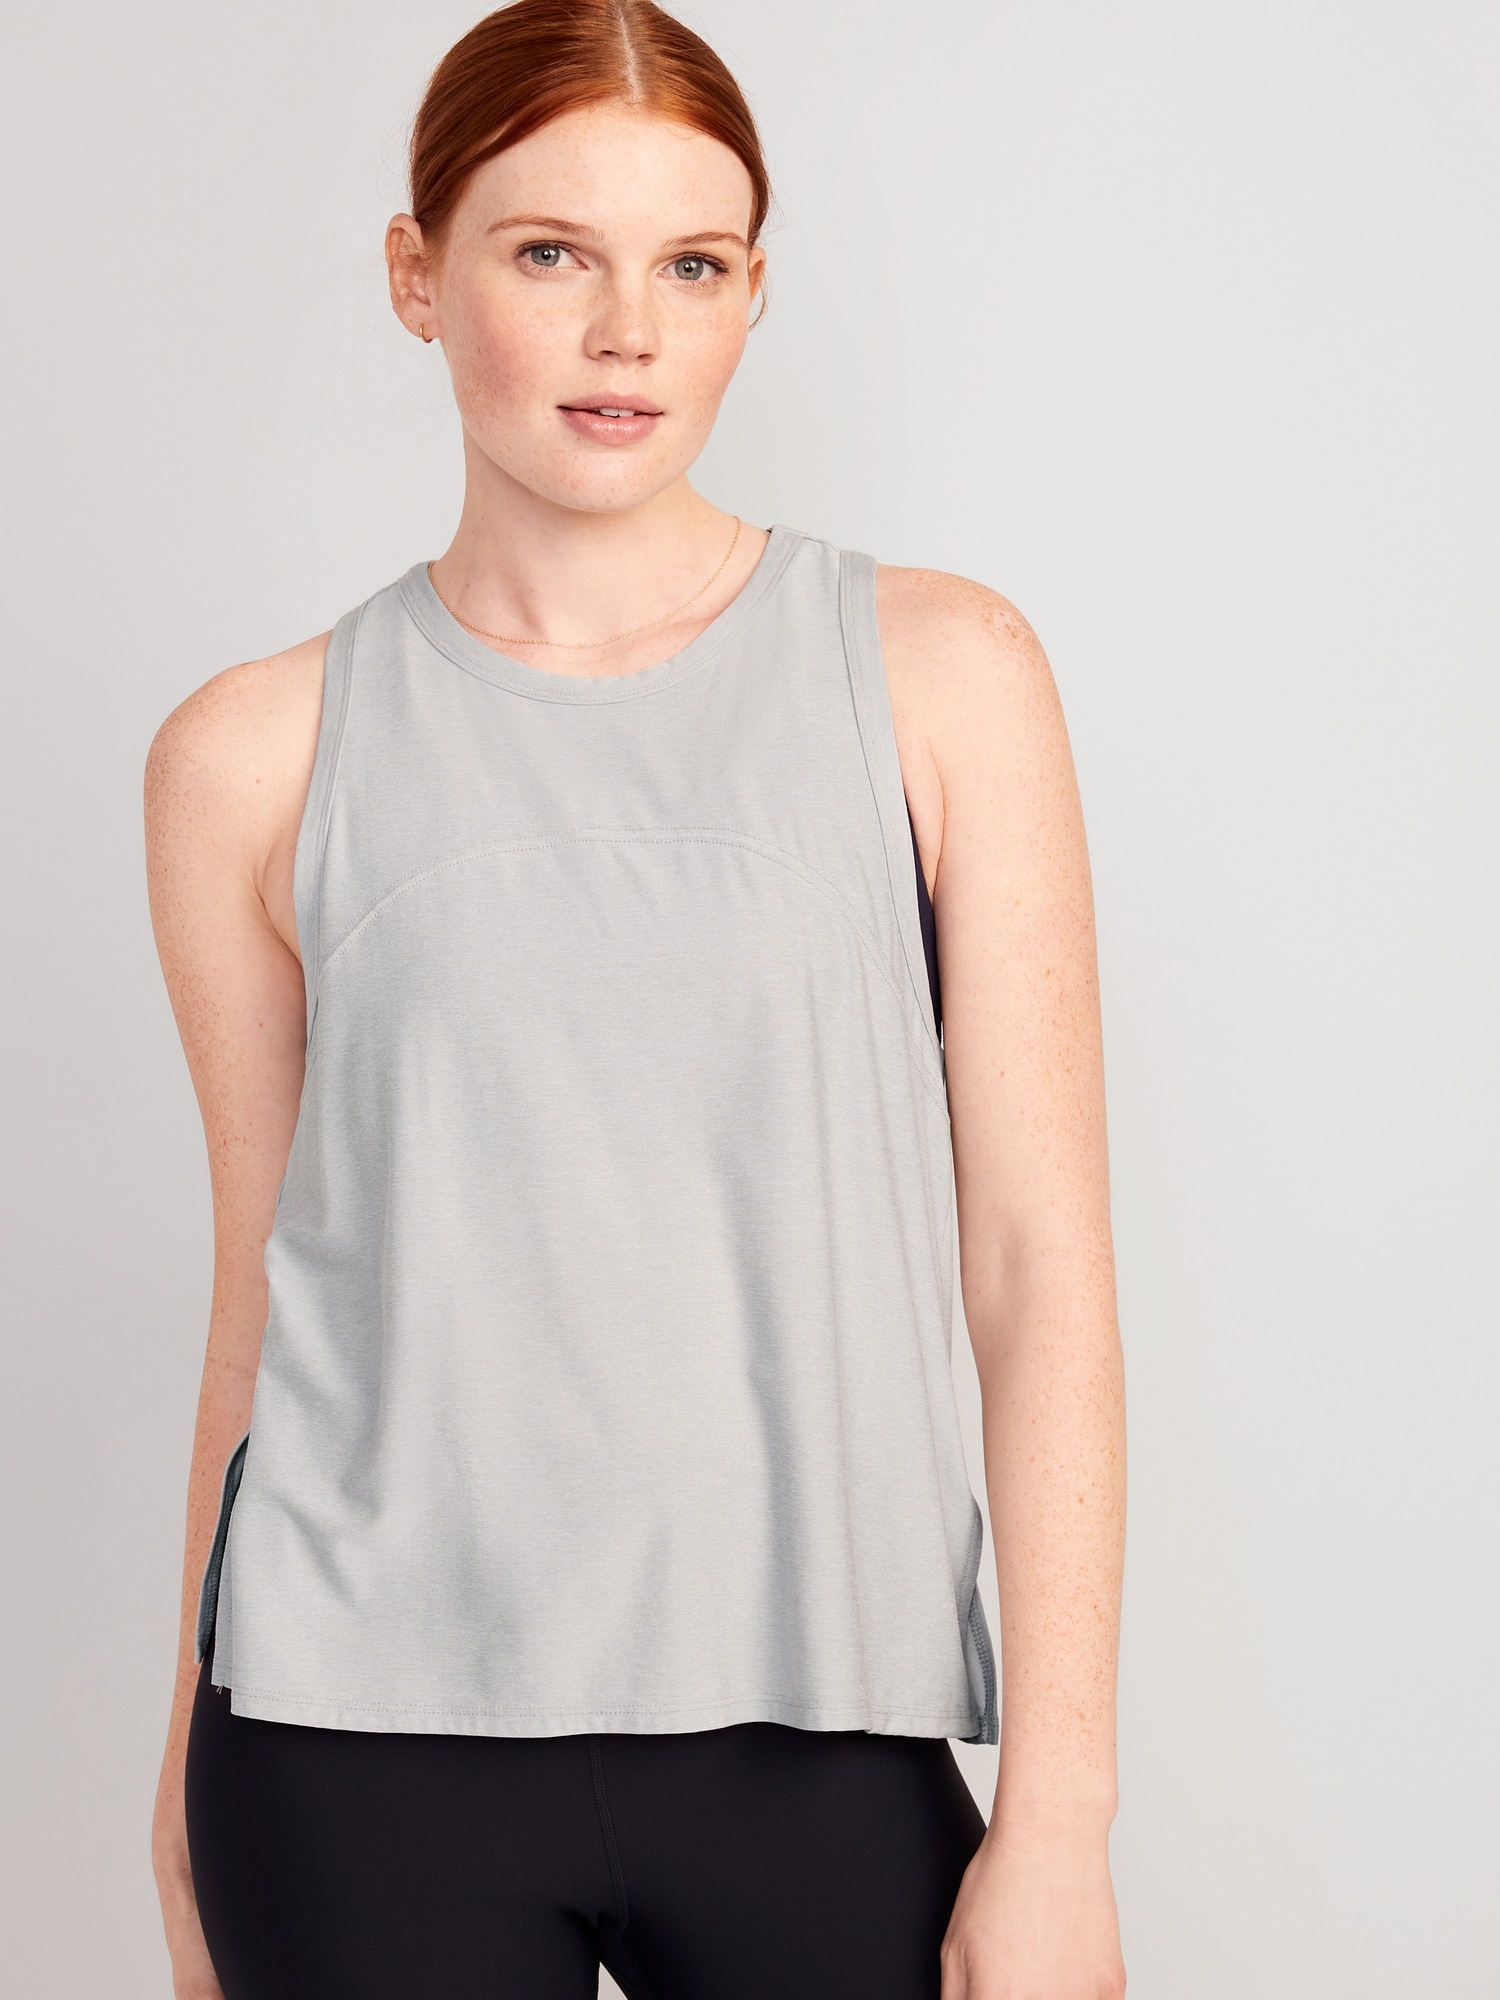 Women\'s Loose Fit Tank Tops | Old Navy